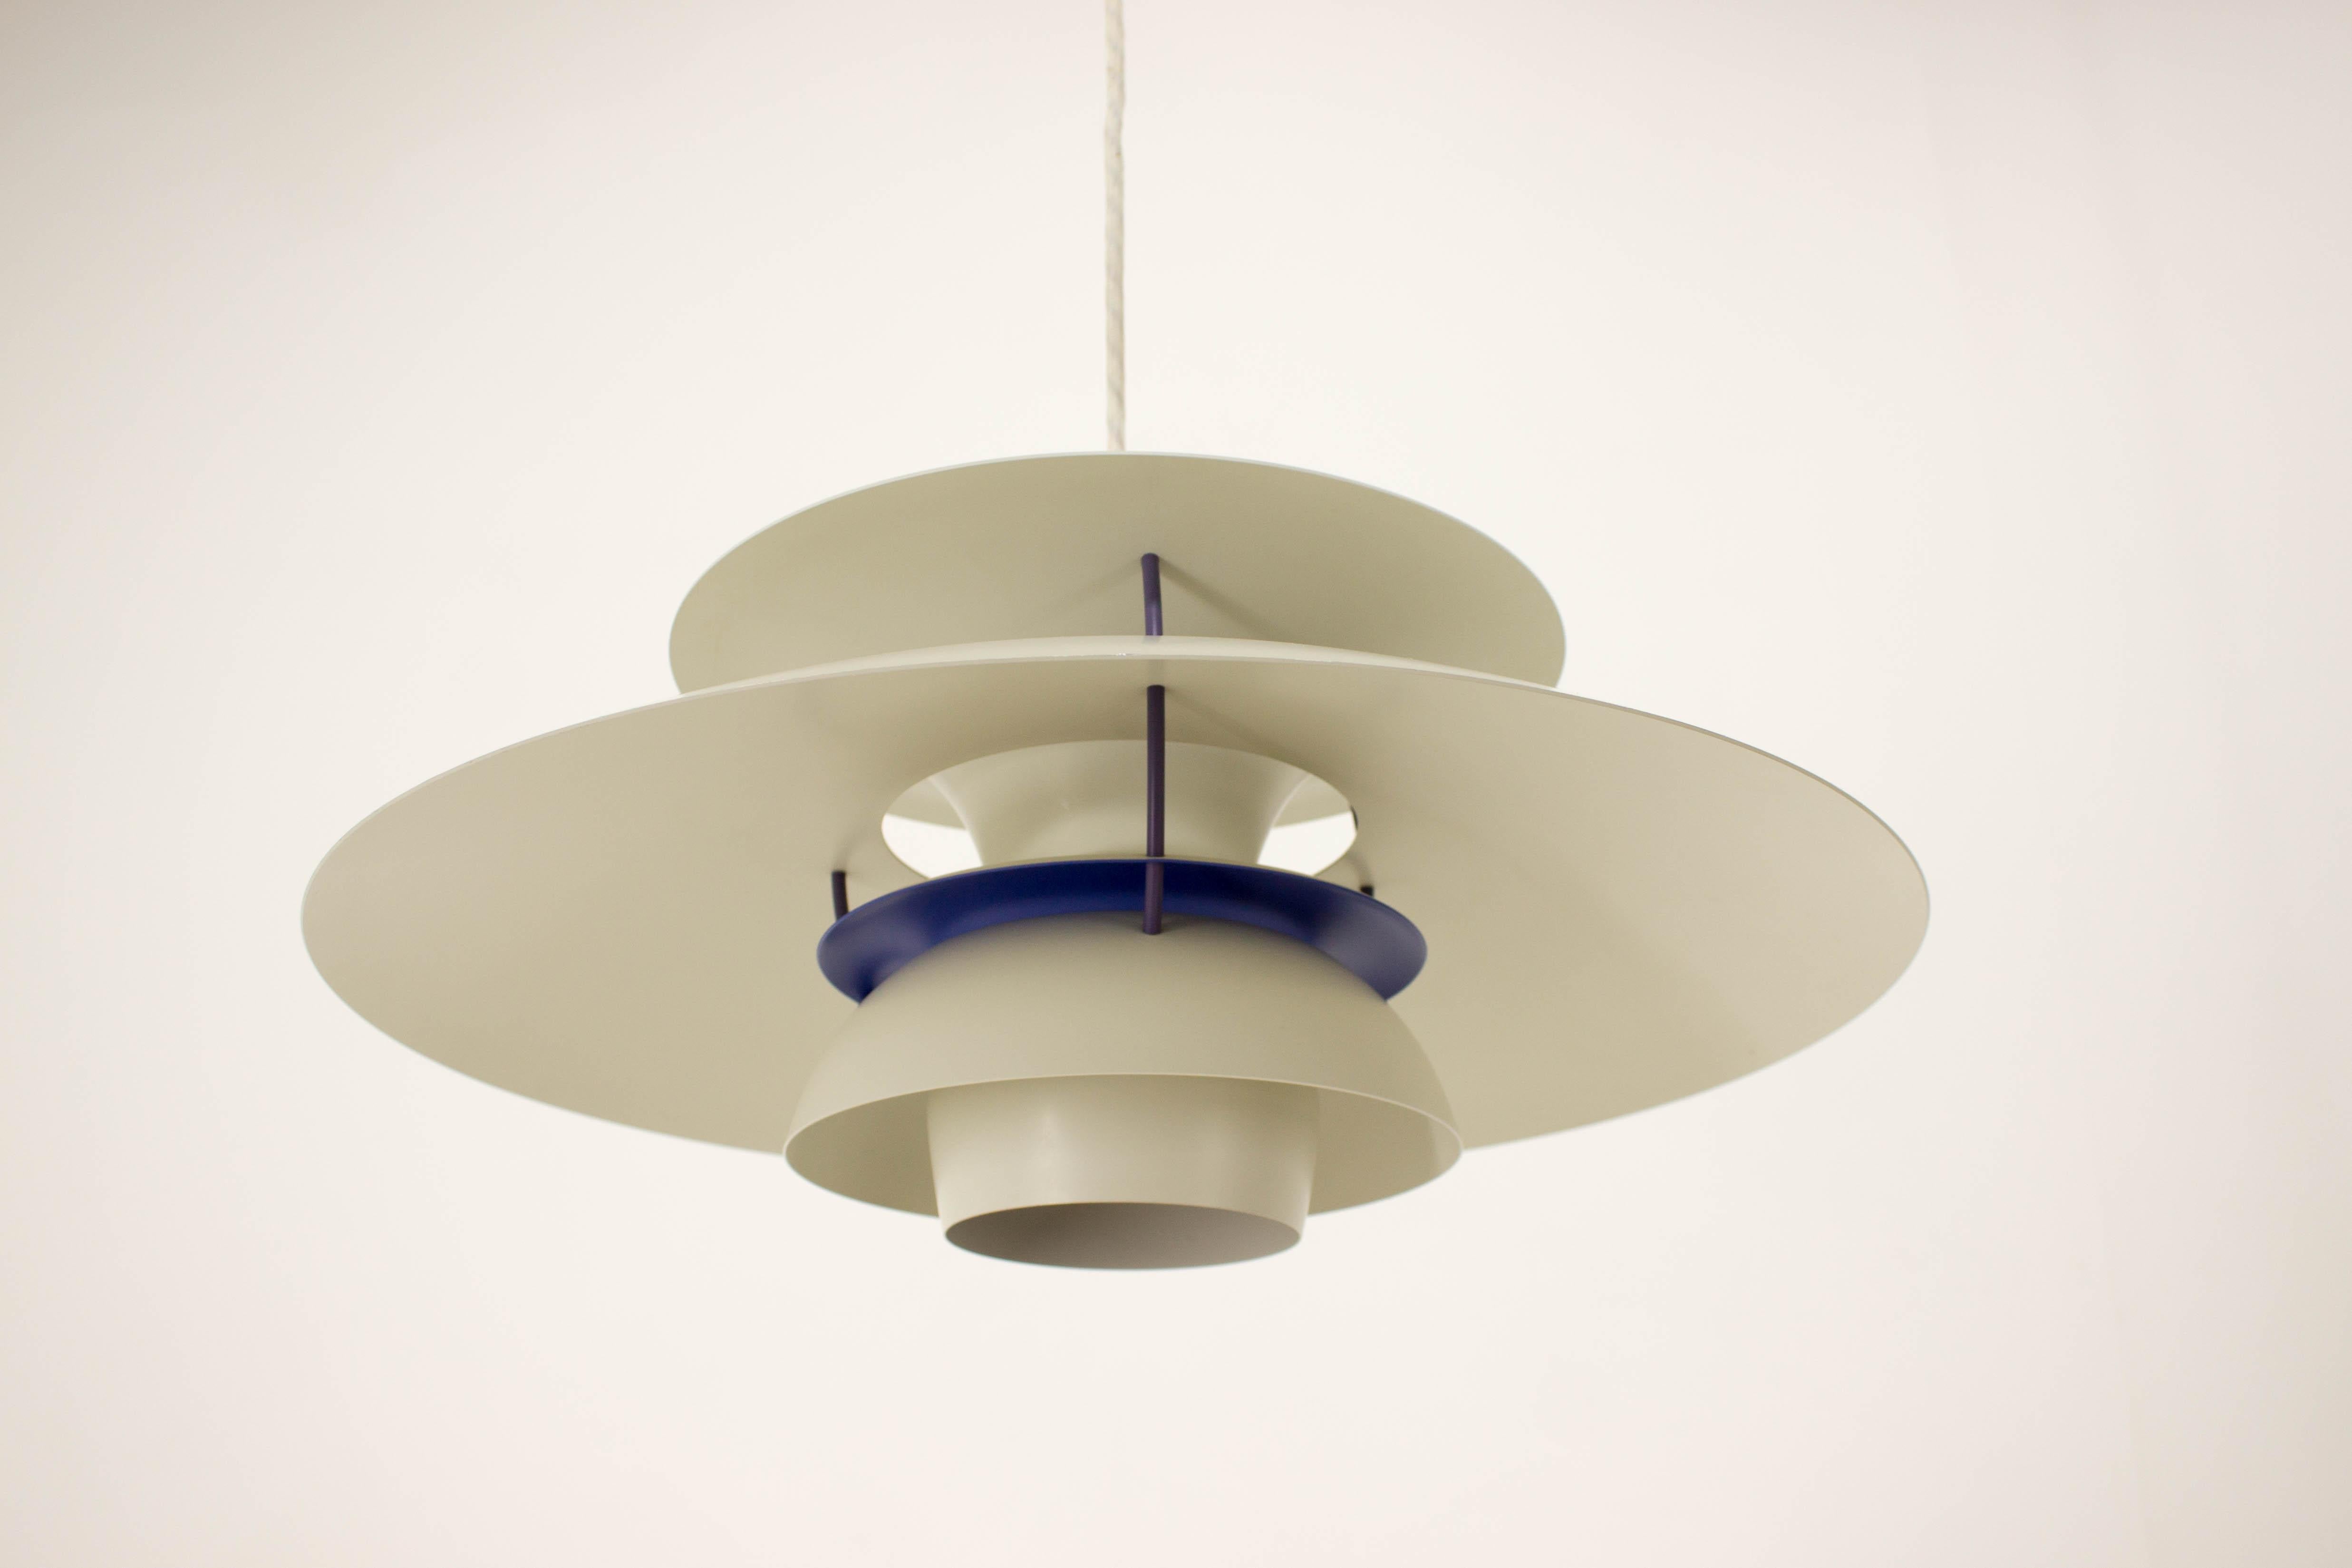 One of the most famous light by Poul Henningsen, designed for Louis Poulsen, Denmark. This piece of matte white-enameled aluminum lamp is accentuated with royal blue and red details creating wide range of subtile shades of these colors. Very good